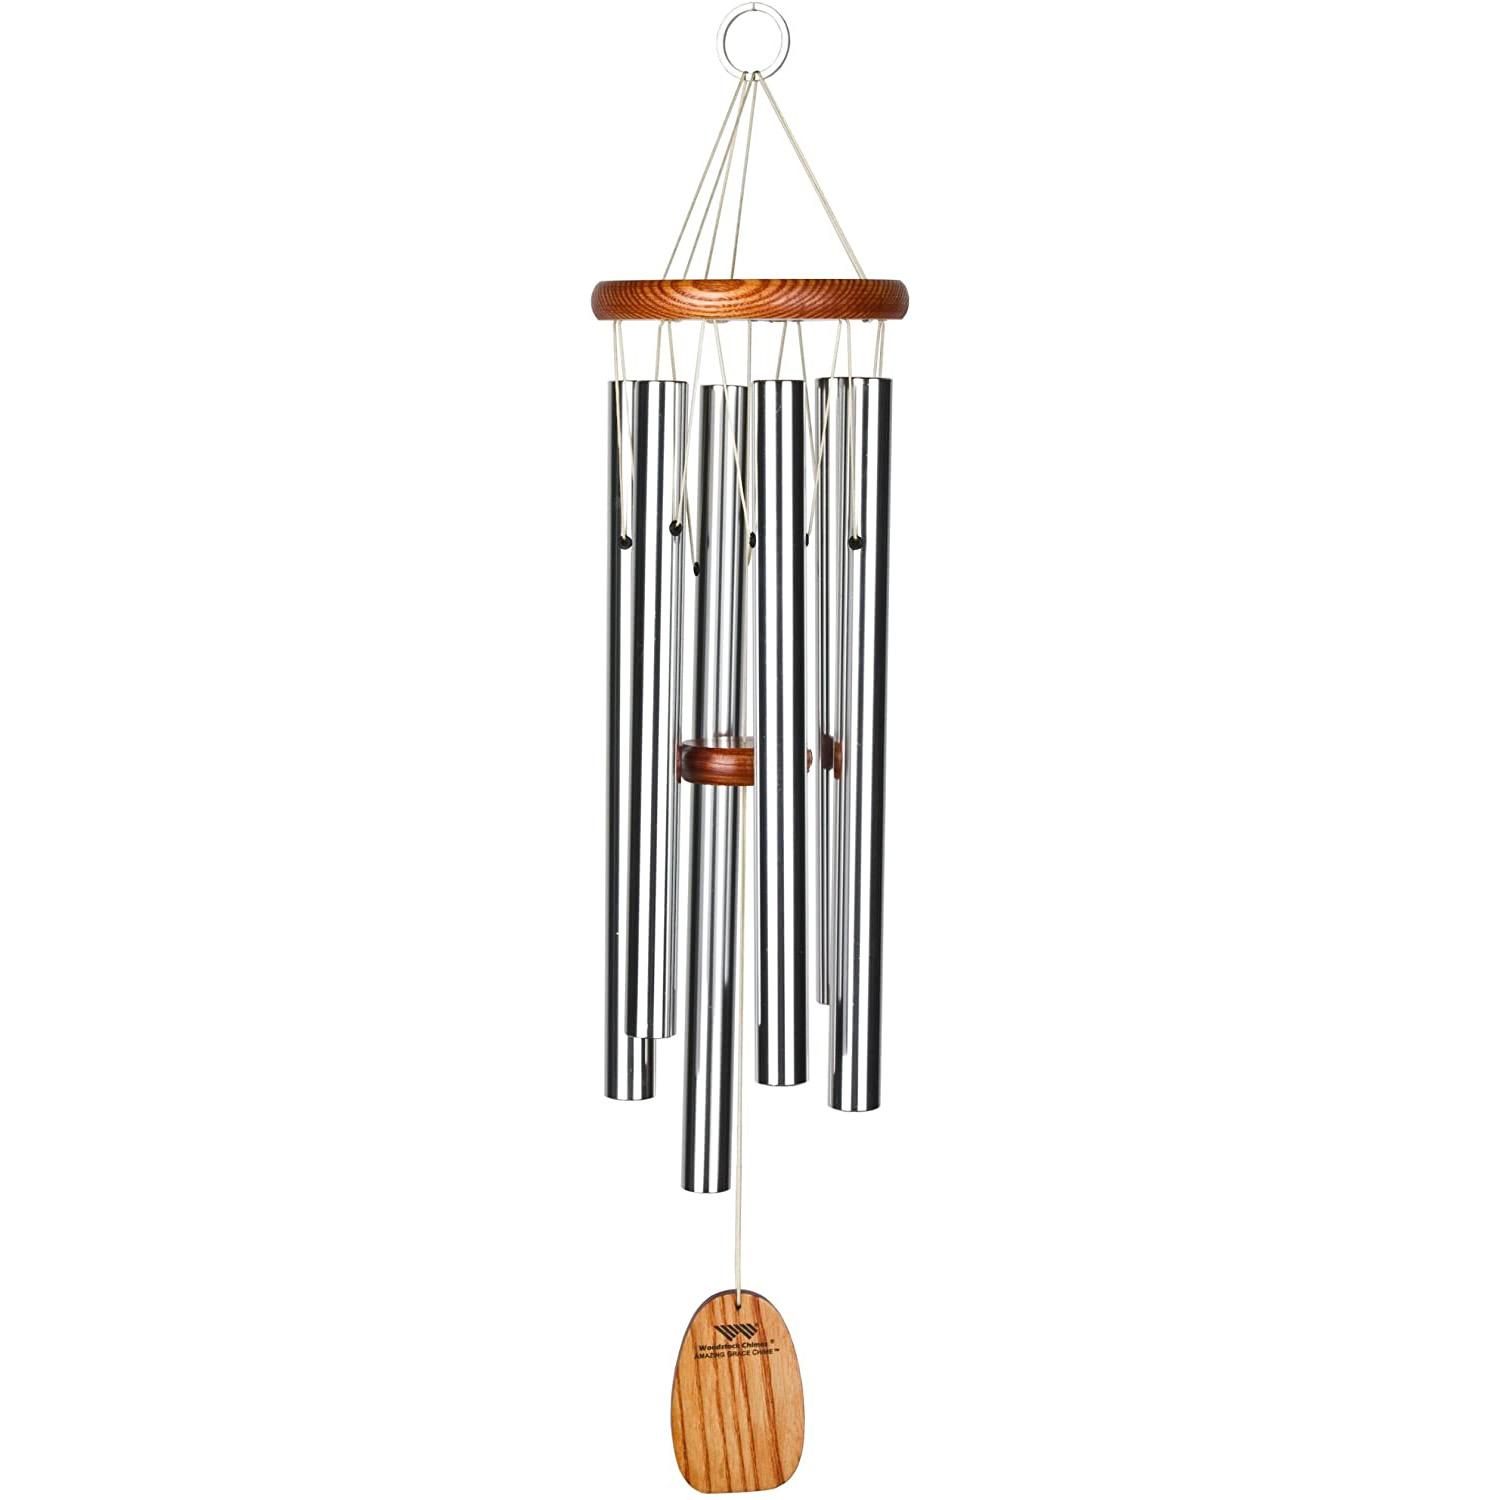 Woodstock Chimes AGMS Music Wind Chime for $24.99